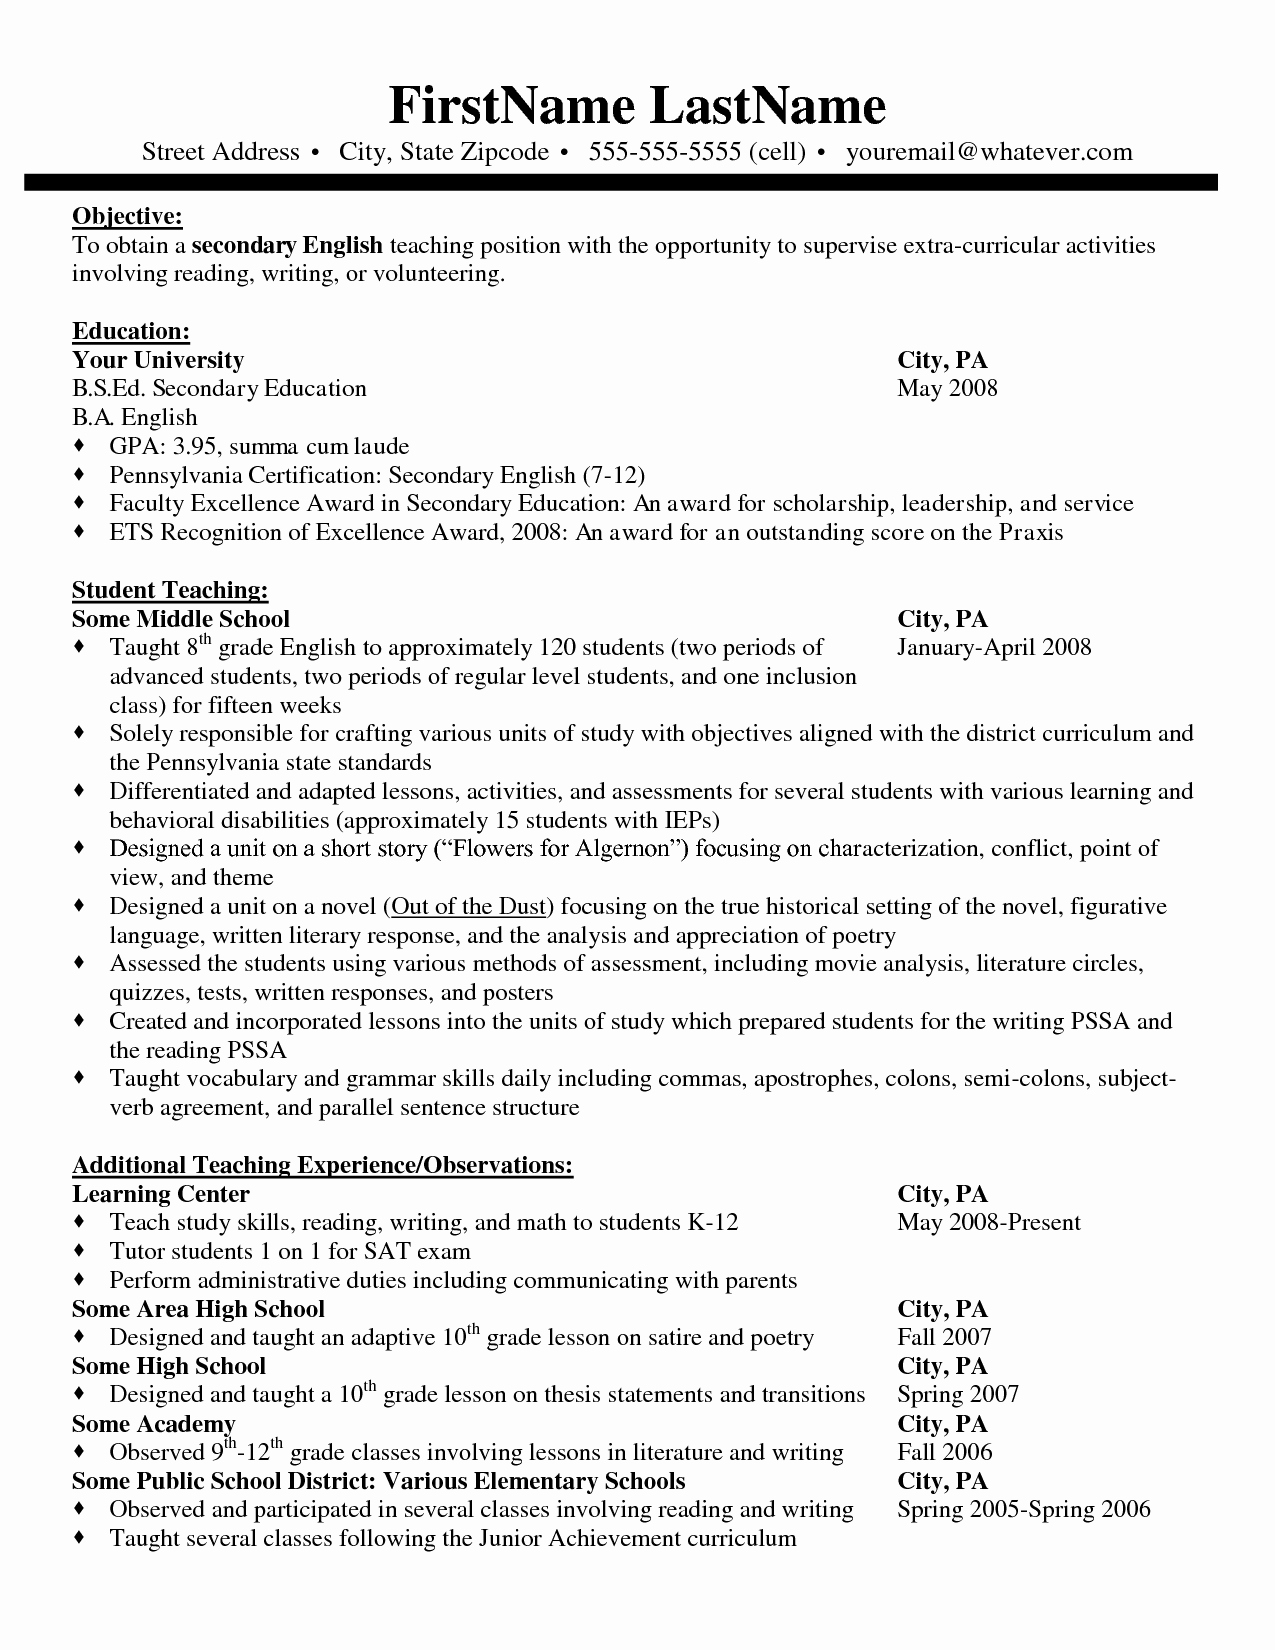 Graduated with Honors Resume Sample Awesome Resume Cum Laude Resume Template